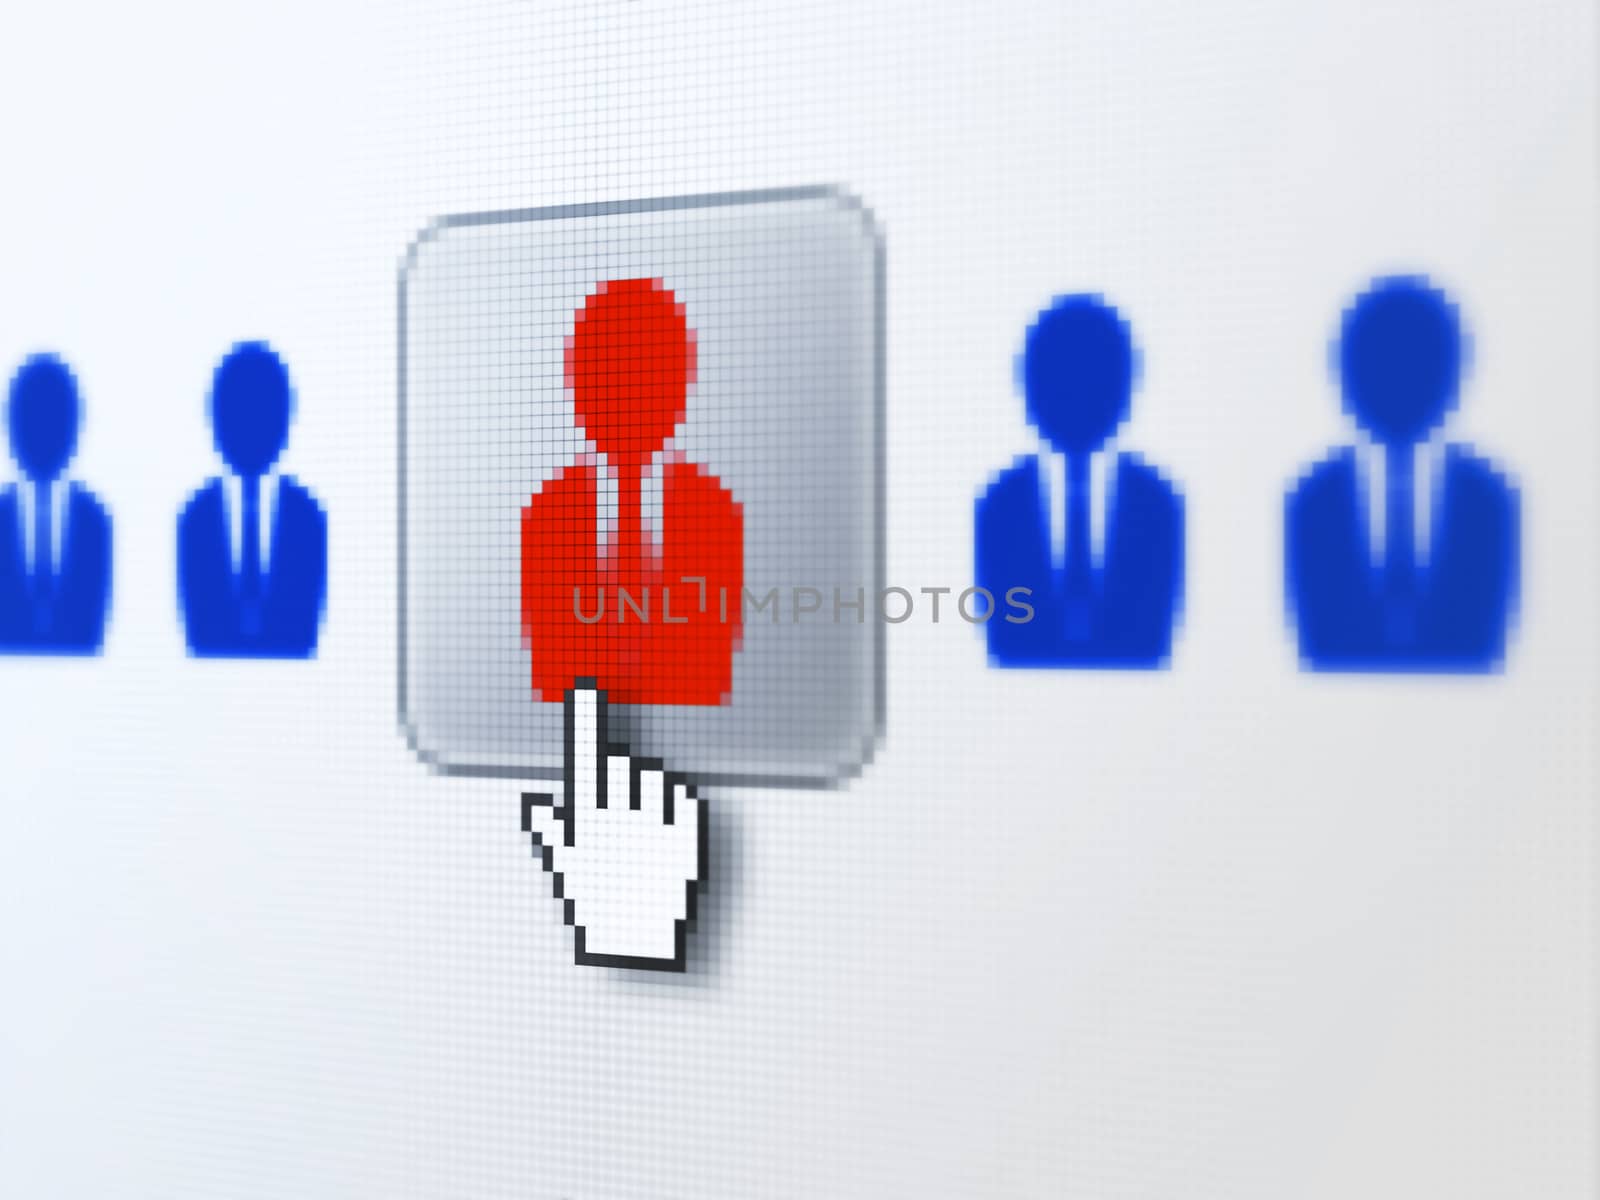 Finance concept: pixelated Business Man icon on button with Hand cursor on digital computer screen, selected focus 3d render